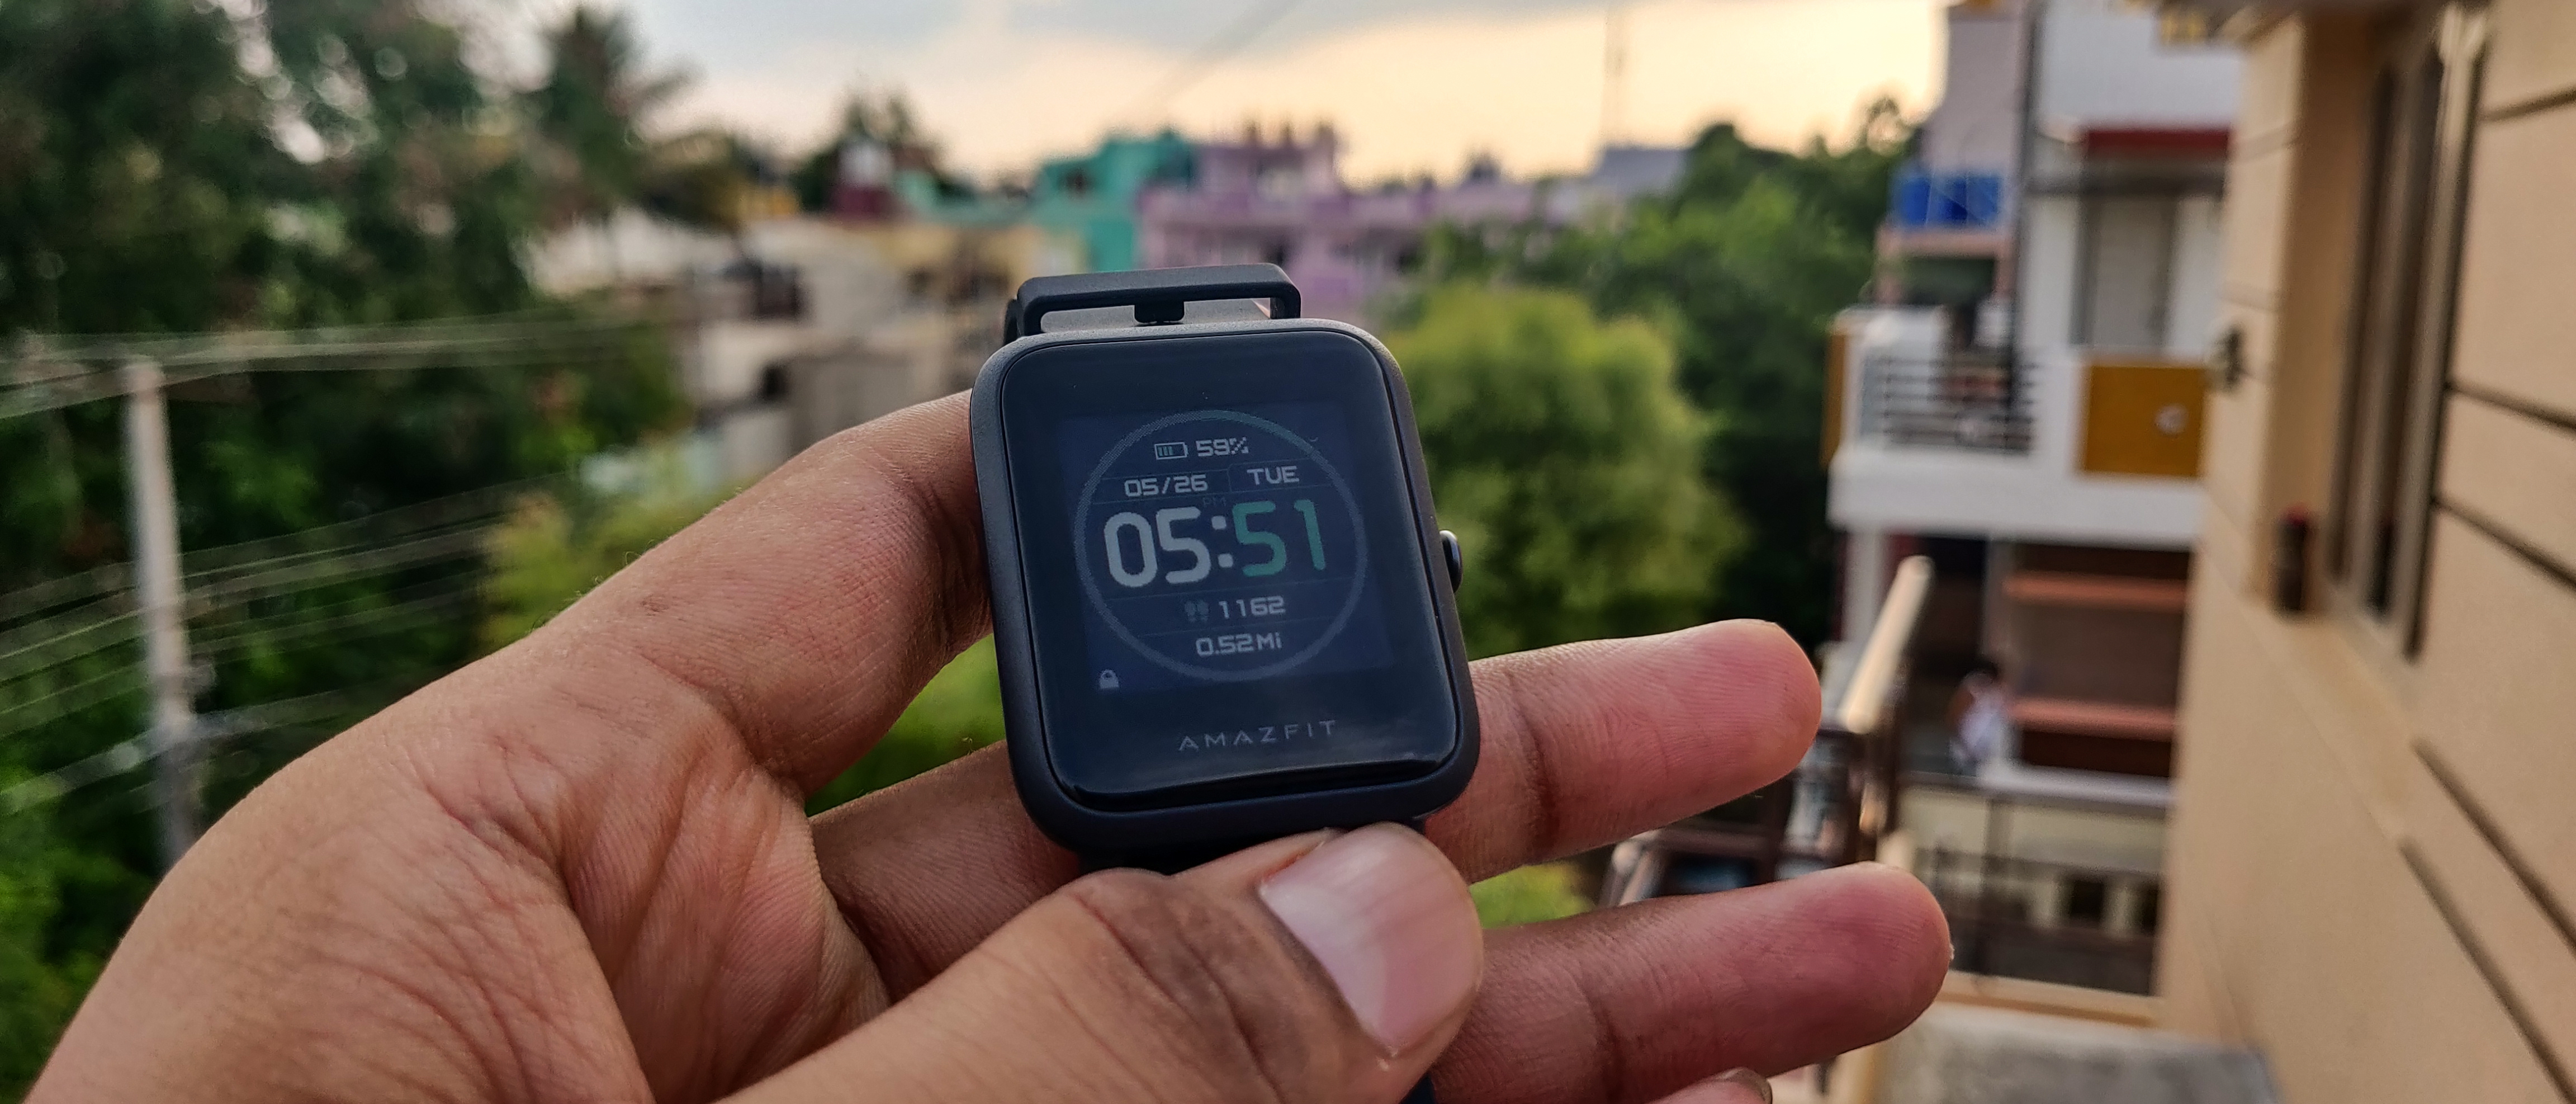 AMAZFIT BIP S LITE Smart Watch ATM5: Things To Know